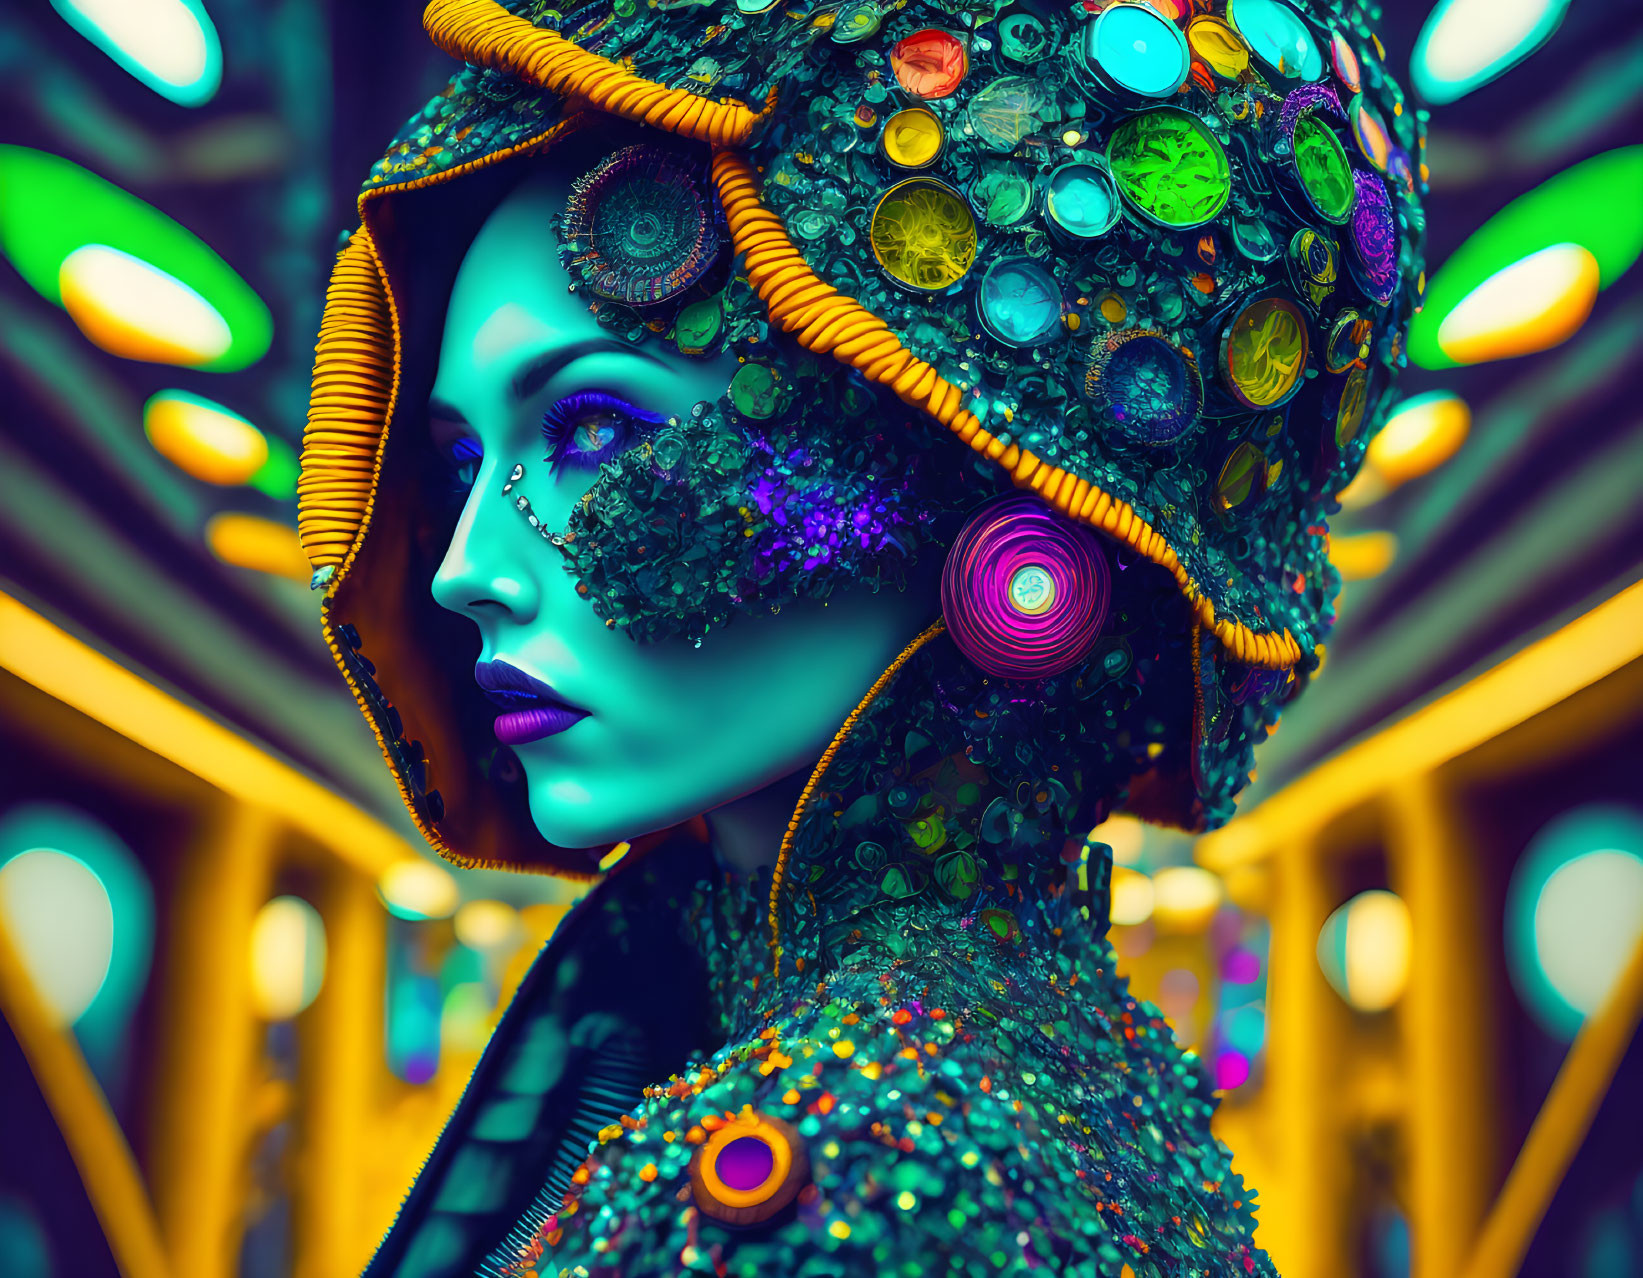 Colorful digital artwork: Female figure with blue skin and gemstones on neon-lit background